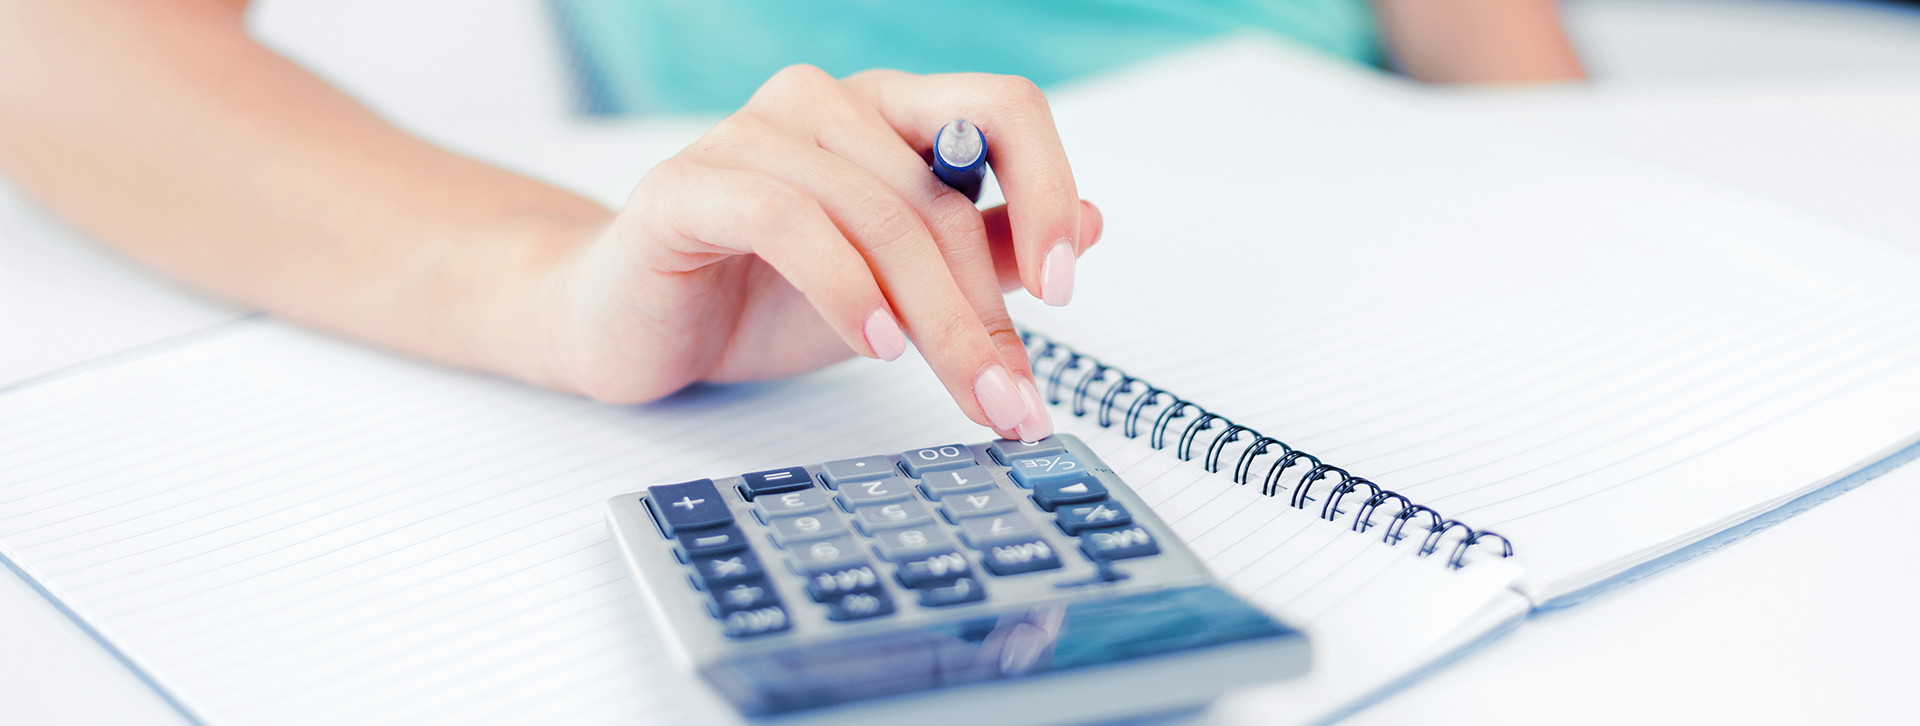 Mortgage Calculator page featured image - woman using calculator